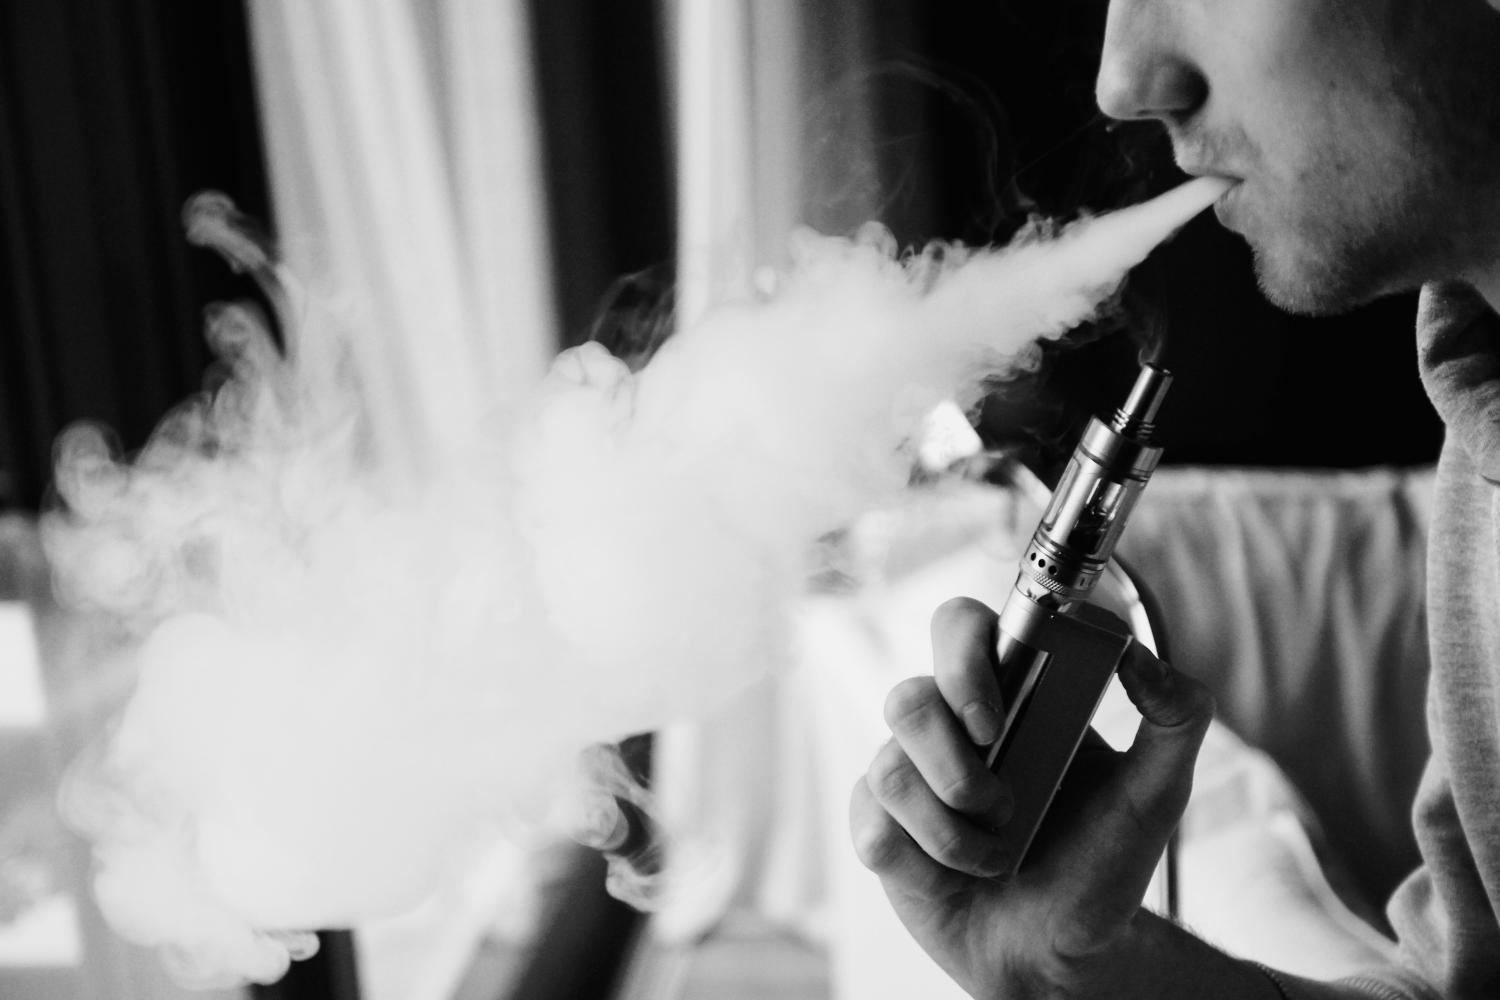 “Vaping” popular, but potential hazards may be unknown